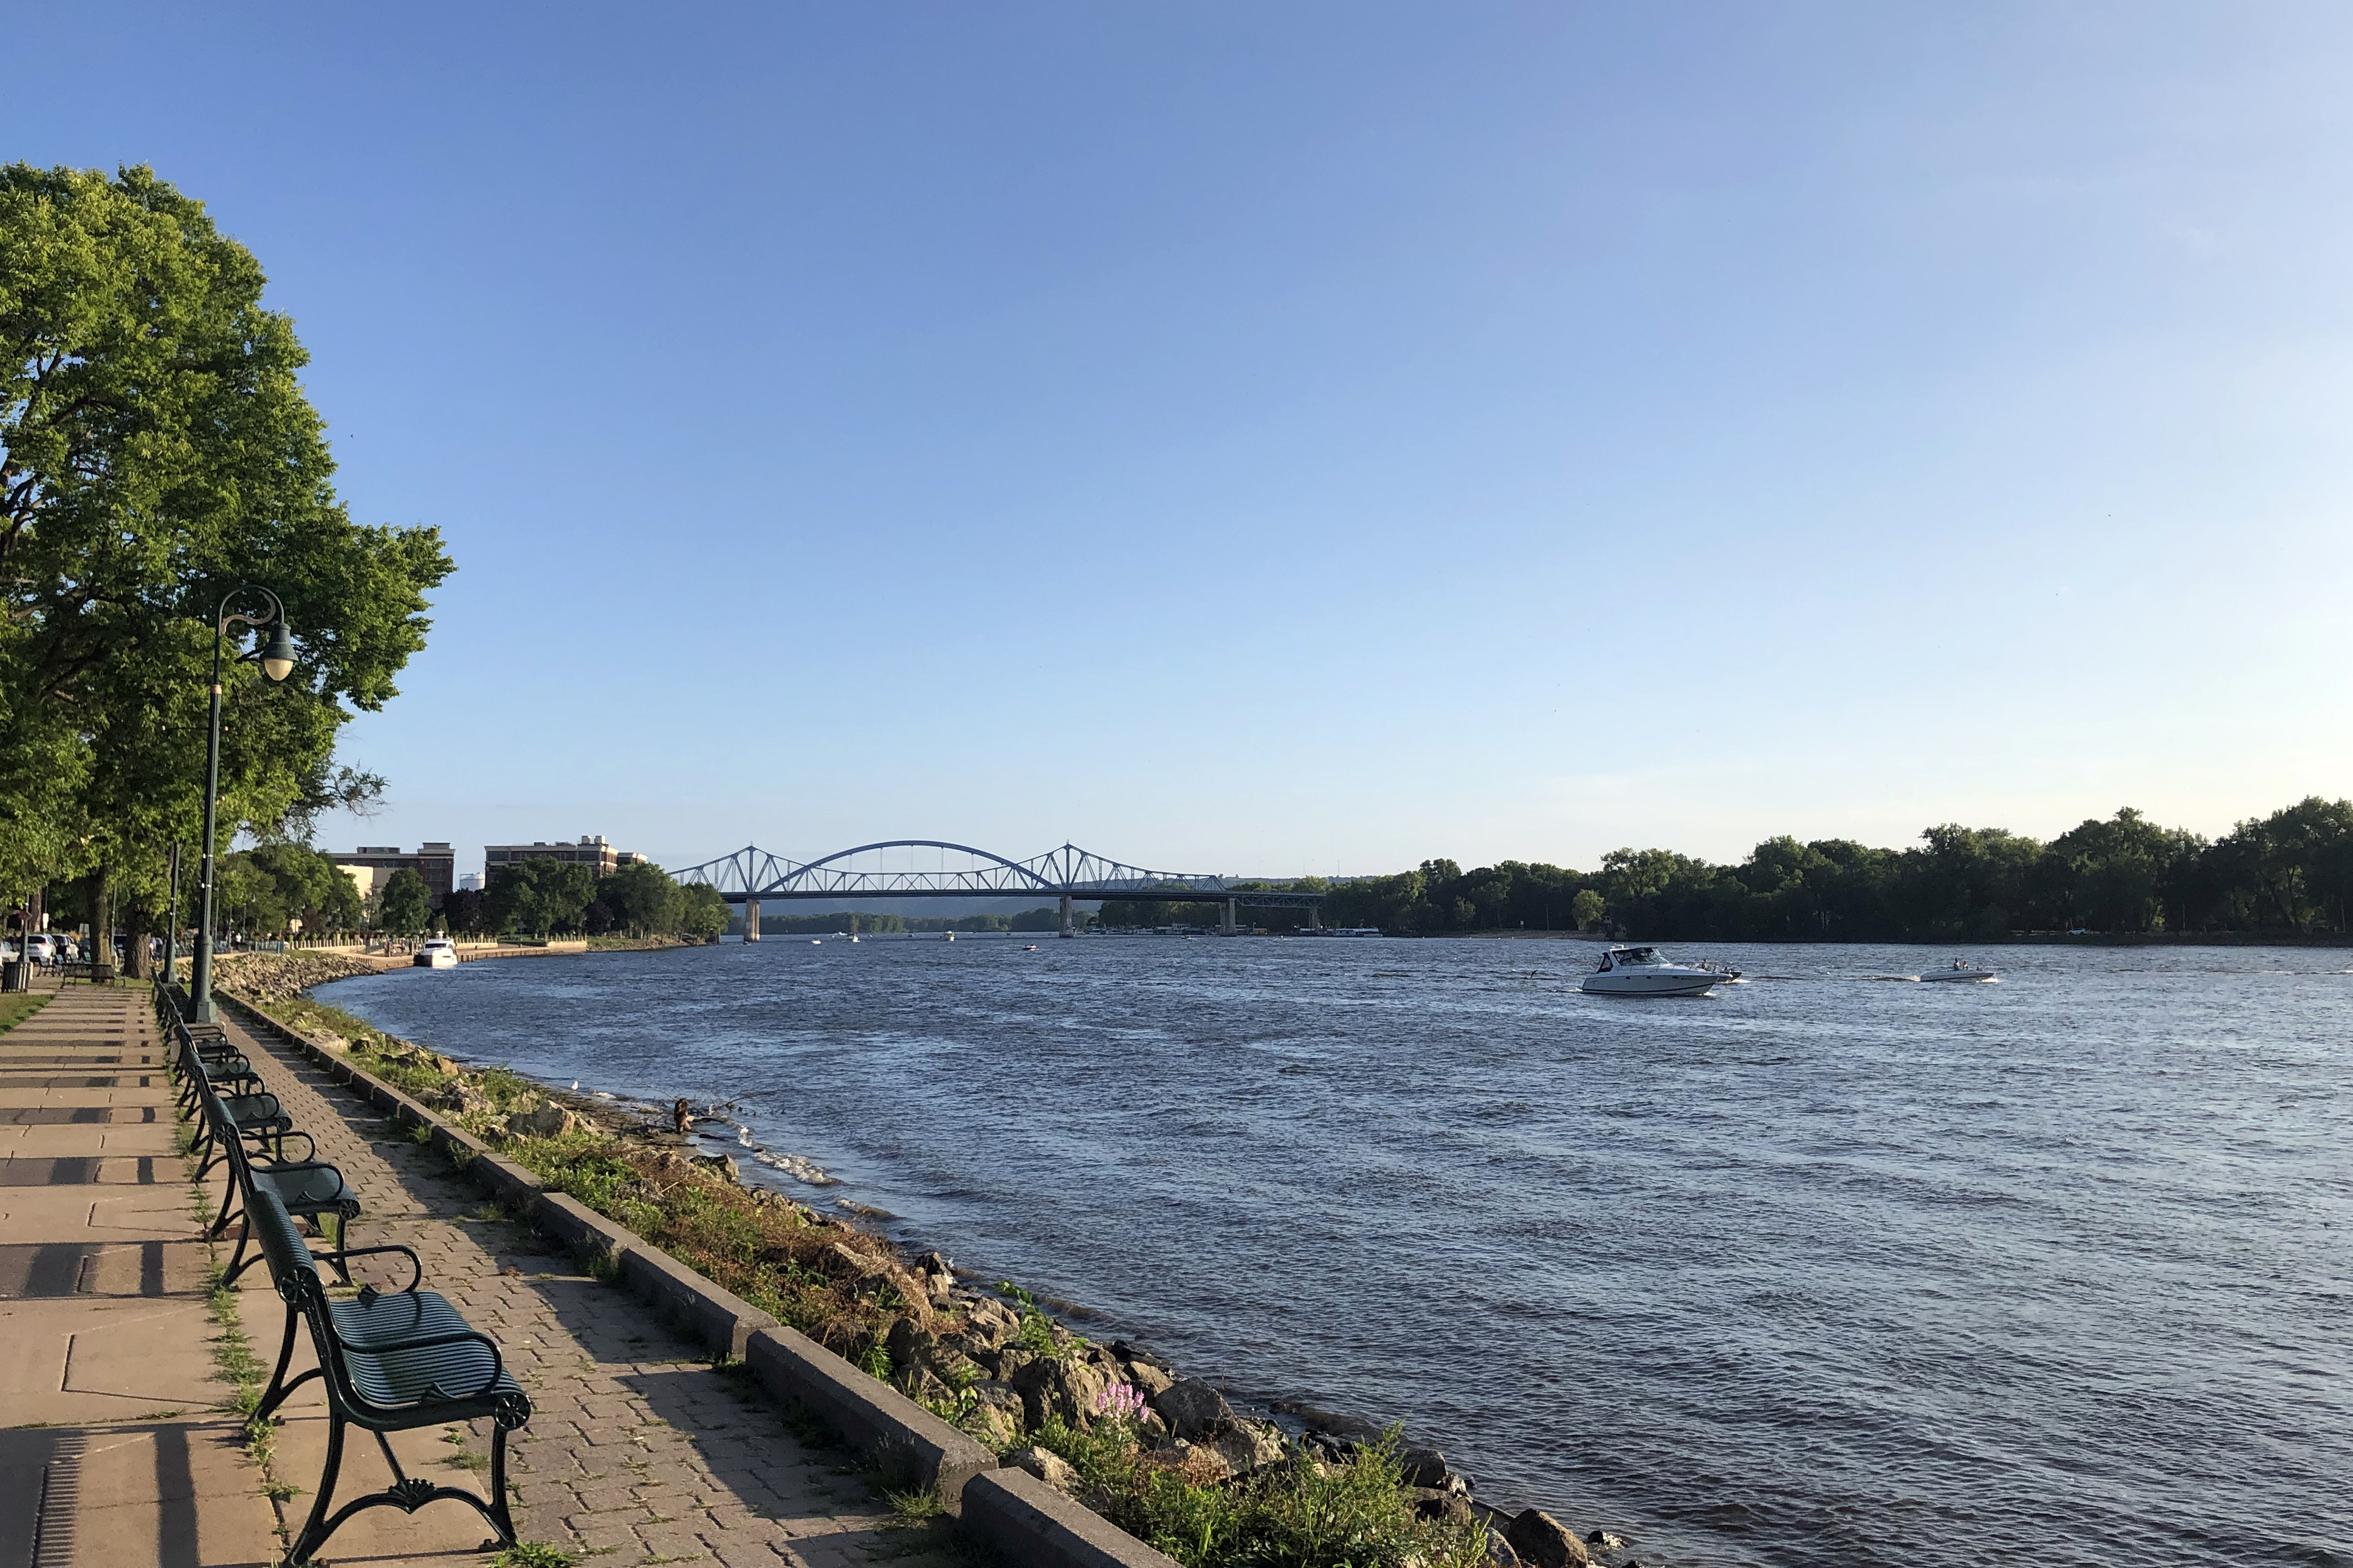 The view of the Big Blue Bridge from Riverside Park